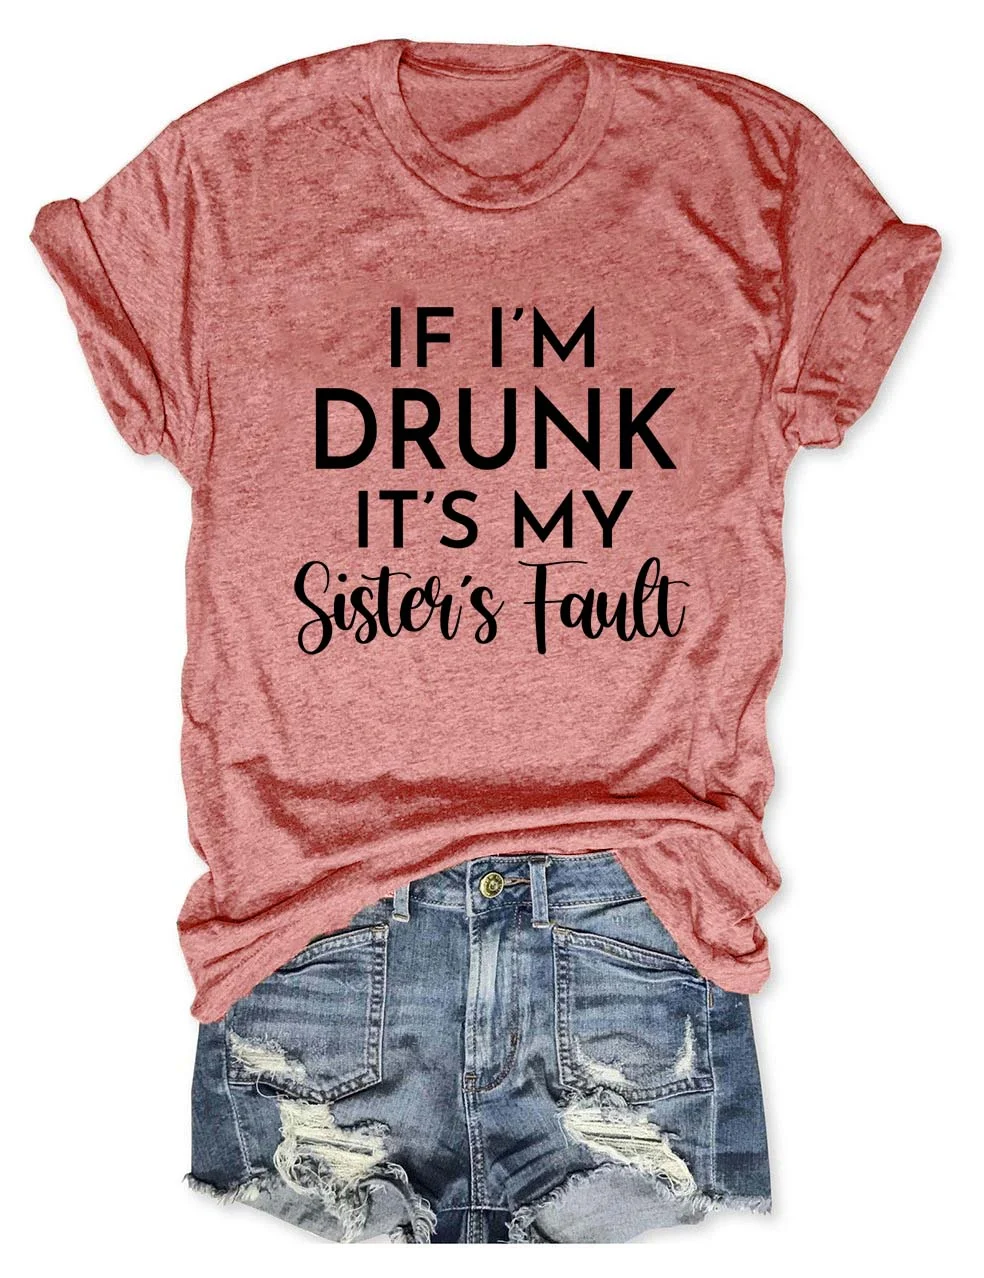 If I'm Drunk It's My Sister's Fault T-Shirt